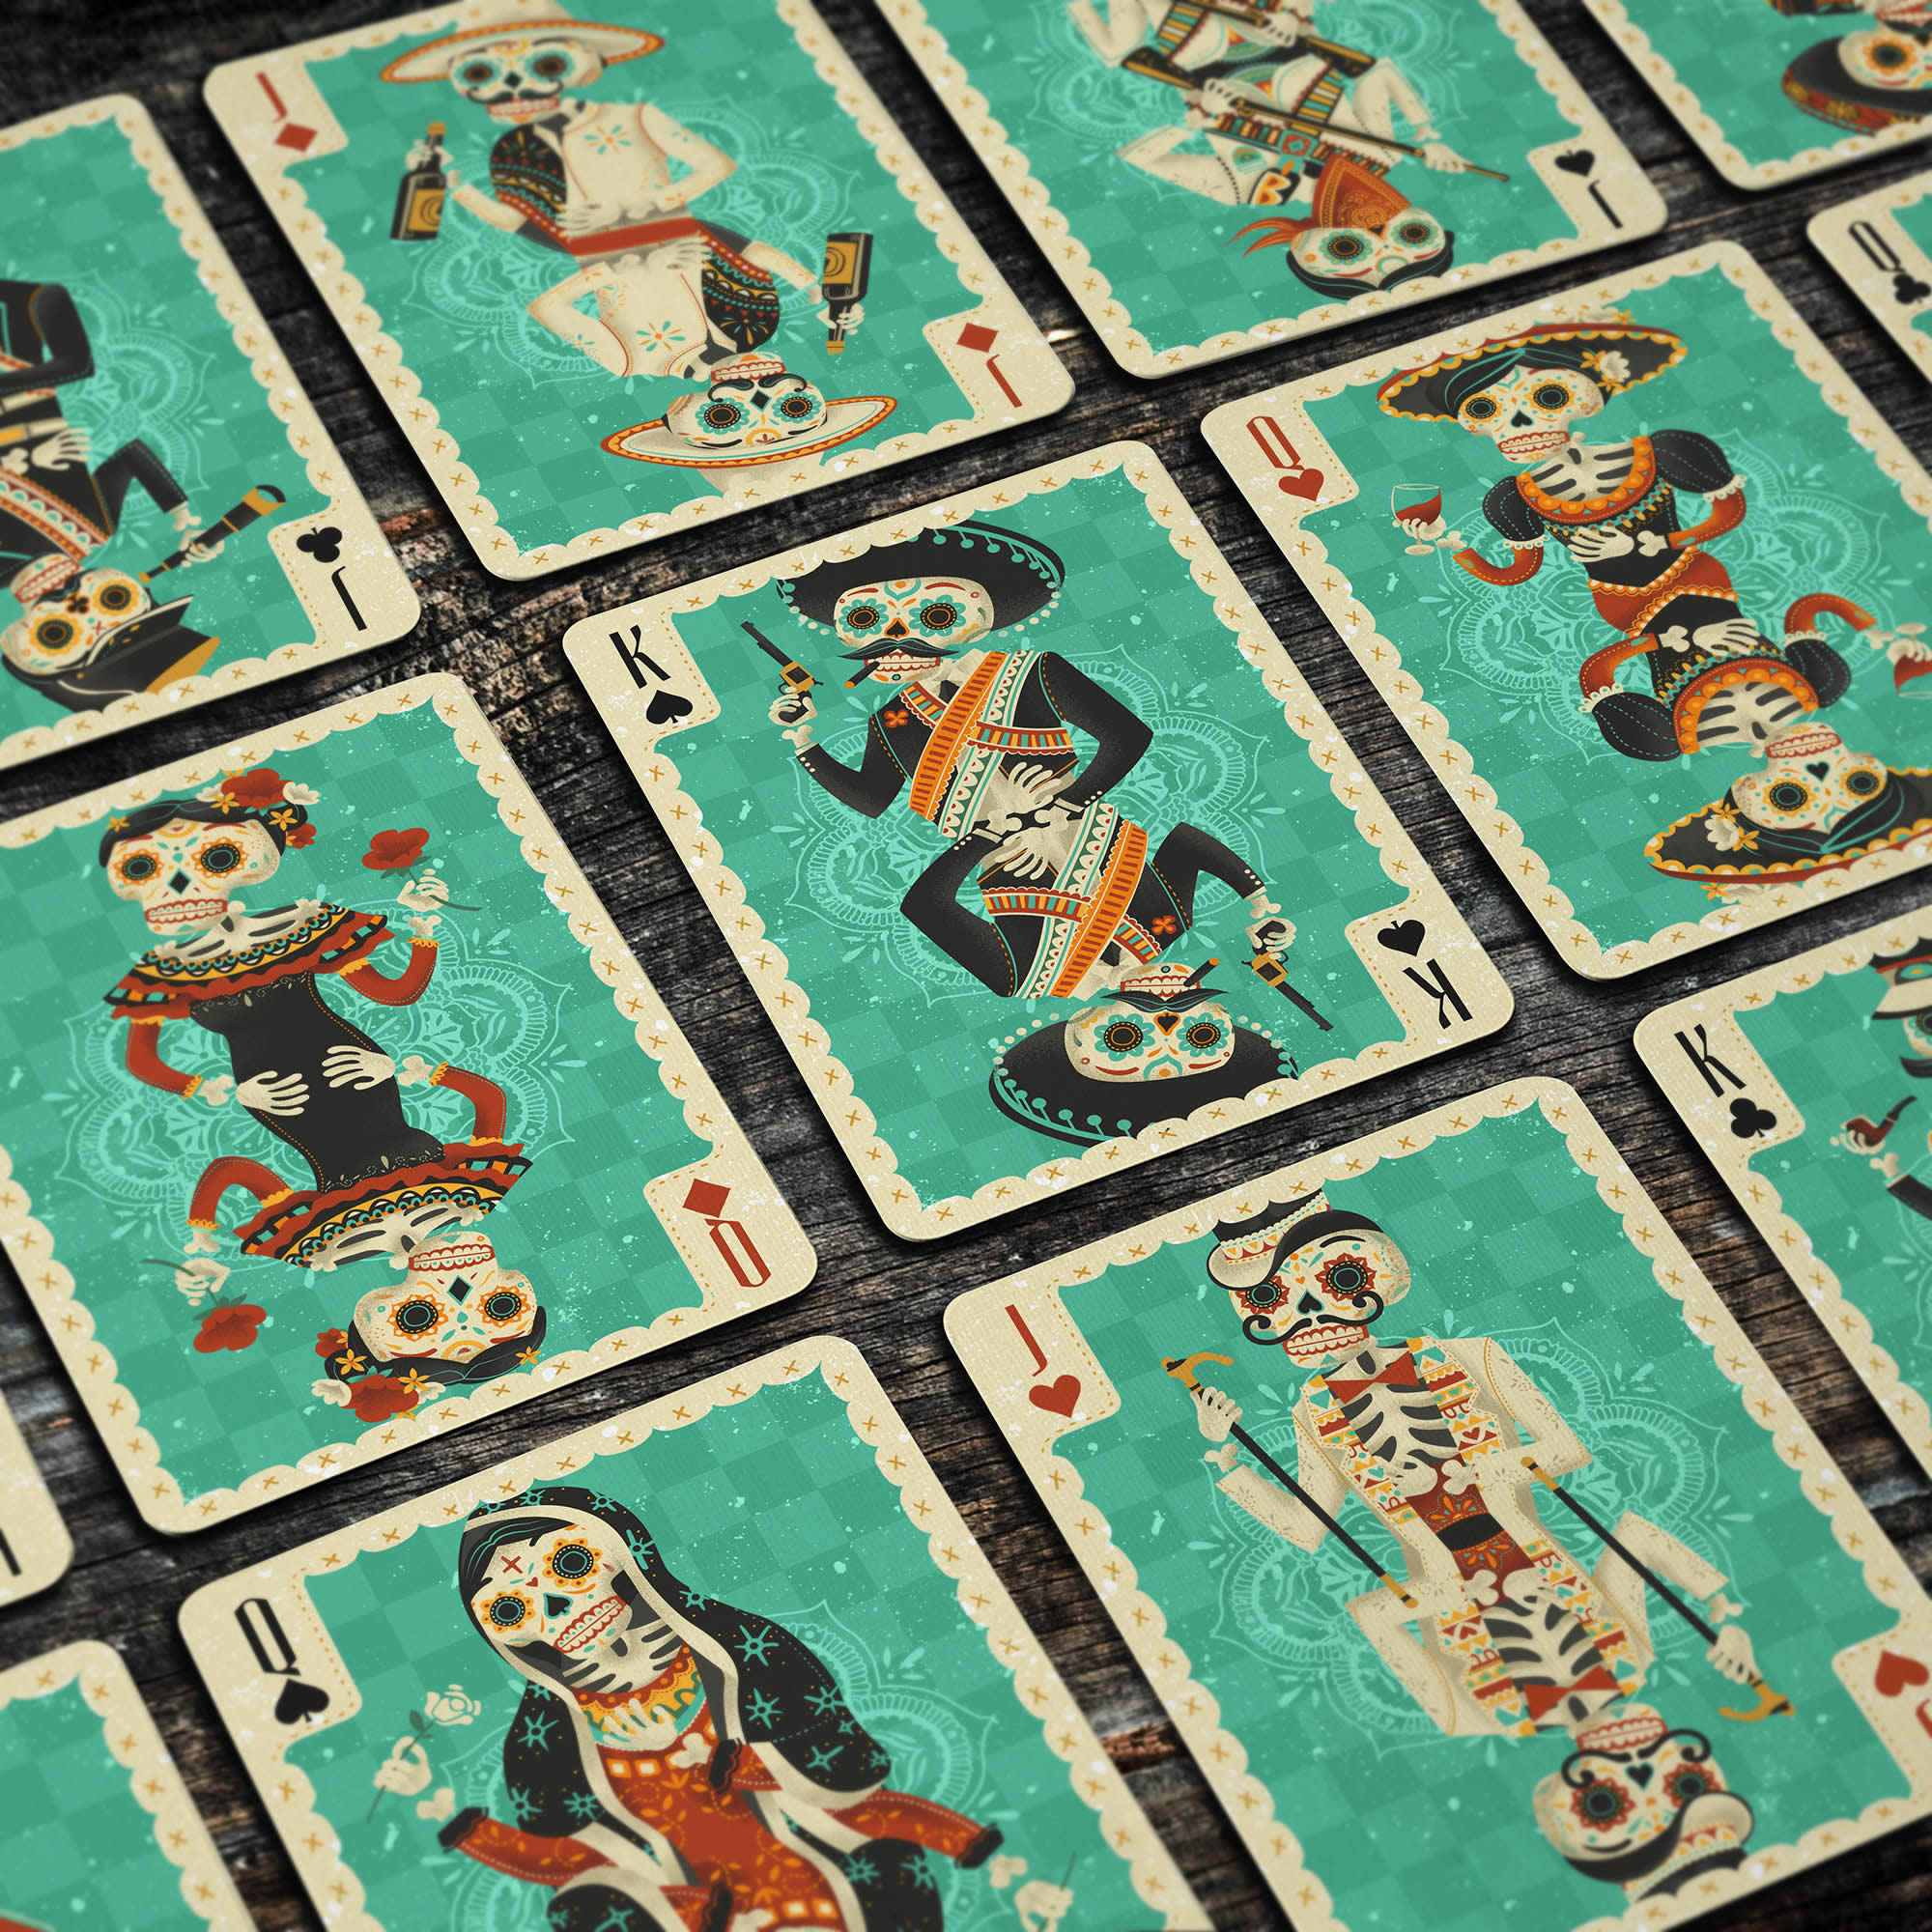 Day of the dead playing cards